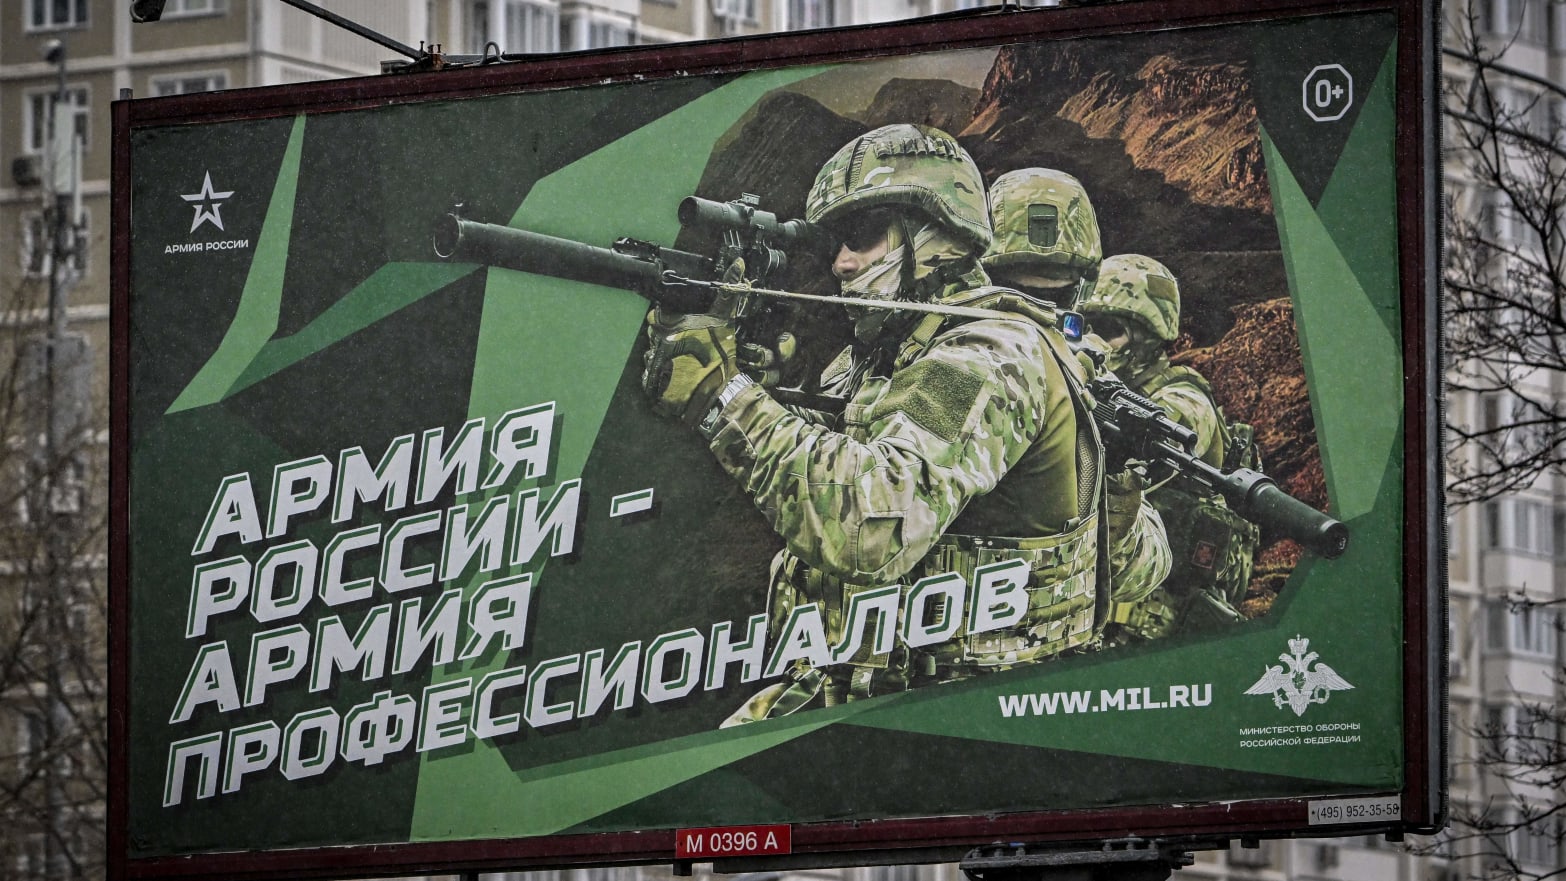 Russia Now Has a Second Frontline Set Up Just to Kill Its Deserters Intel